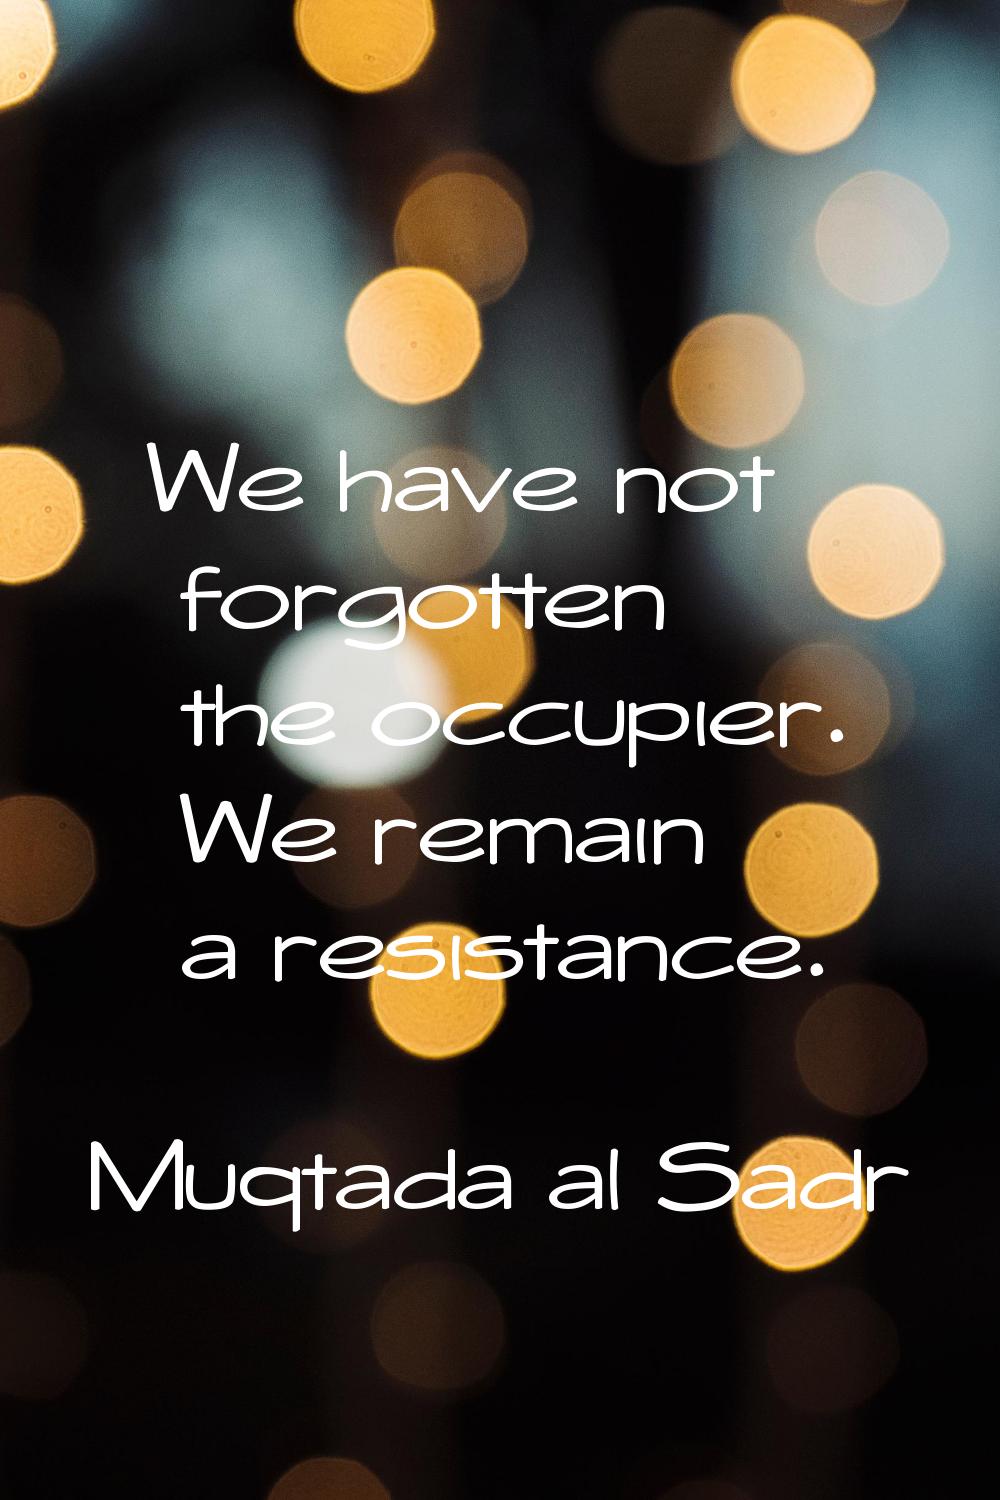 We have not forgotten the occupier. We remain a resistance.